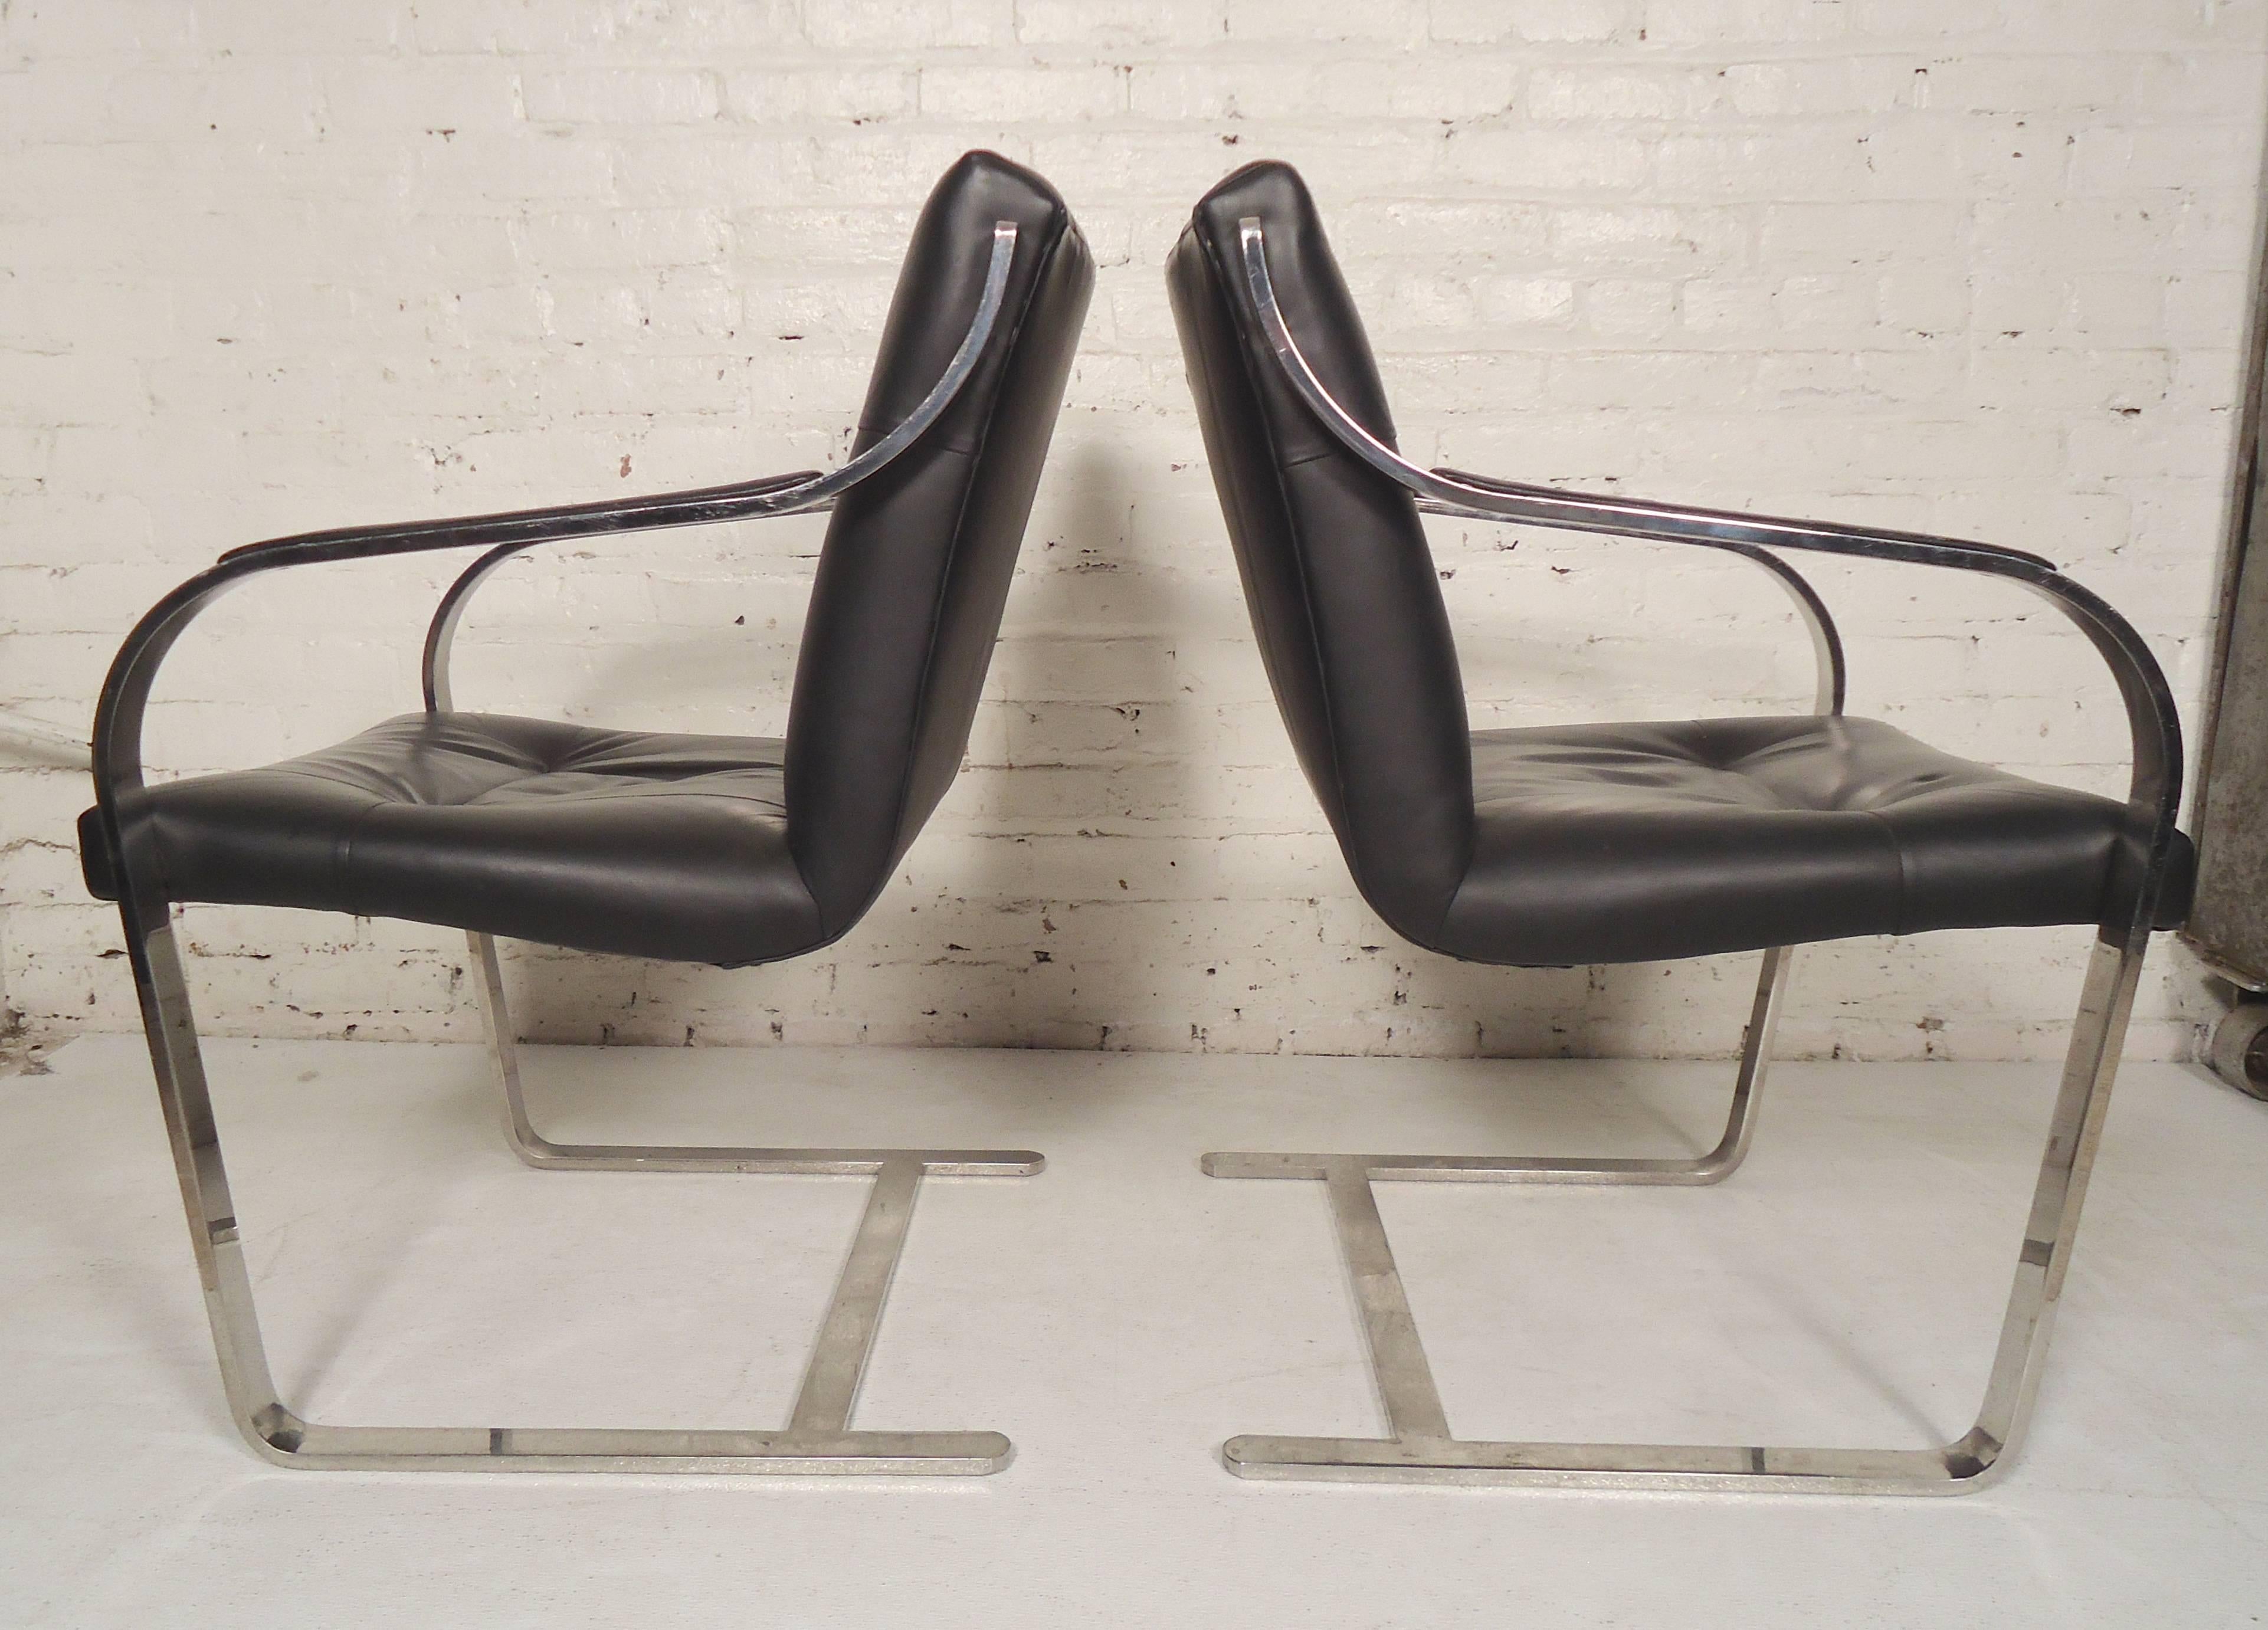 Pair of polished chrome chairs with cantilever base. Made by Brueton, featuring handsome lines and comfortable cushioned seat and back.

(Please confirm item location - NY or NJ - with dealer).
 